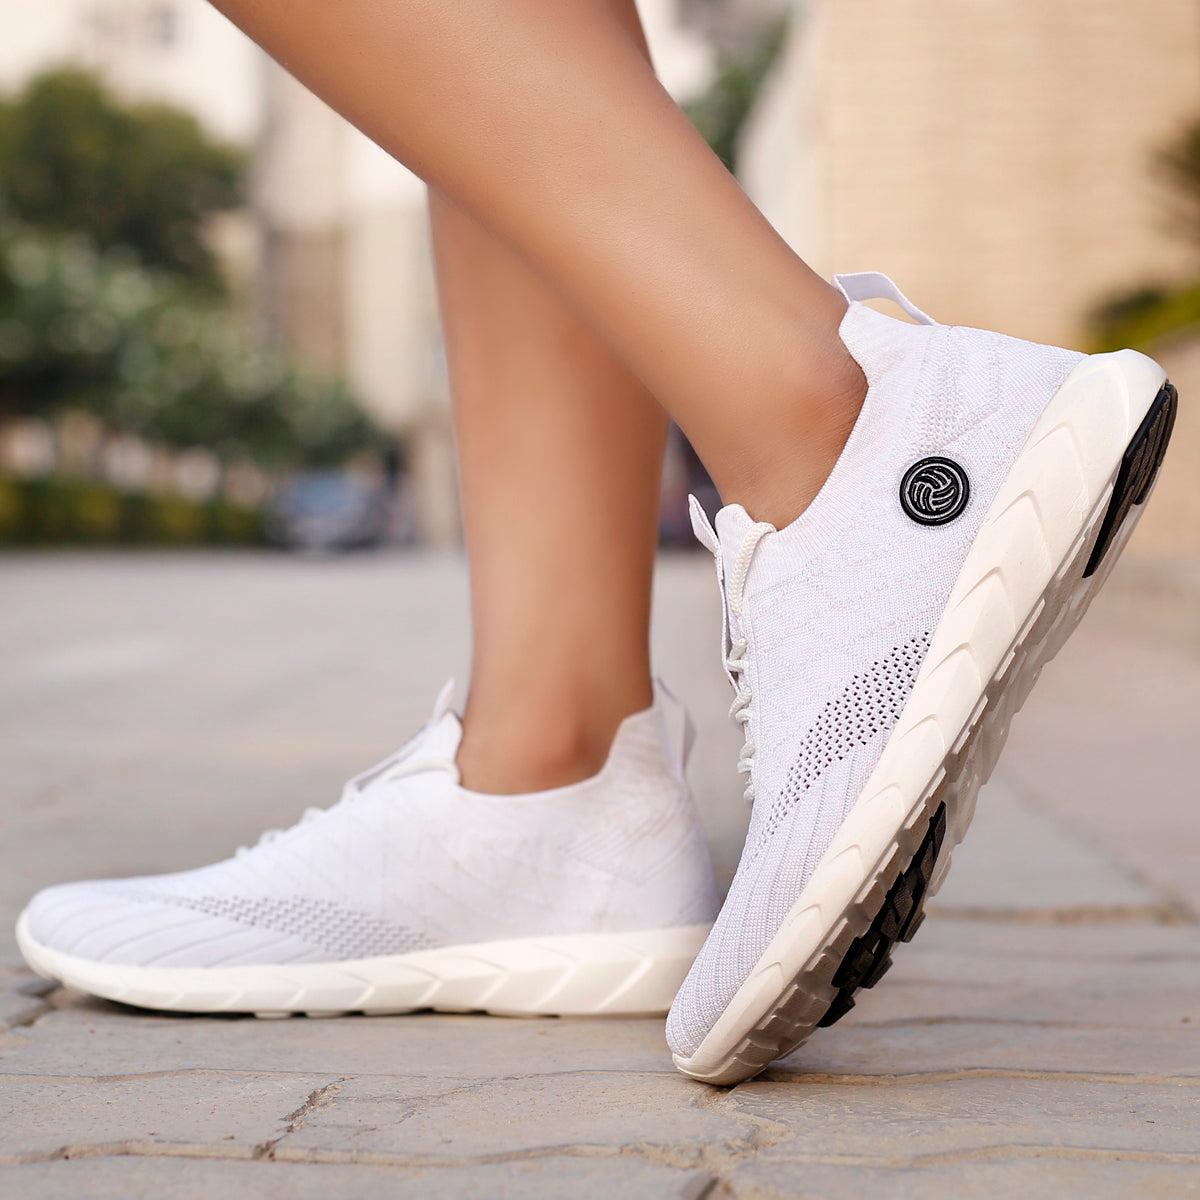 Casual shoes for women | Wave Rider white sneakers |